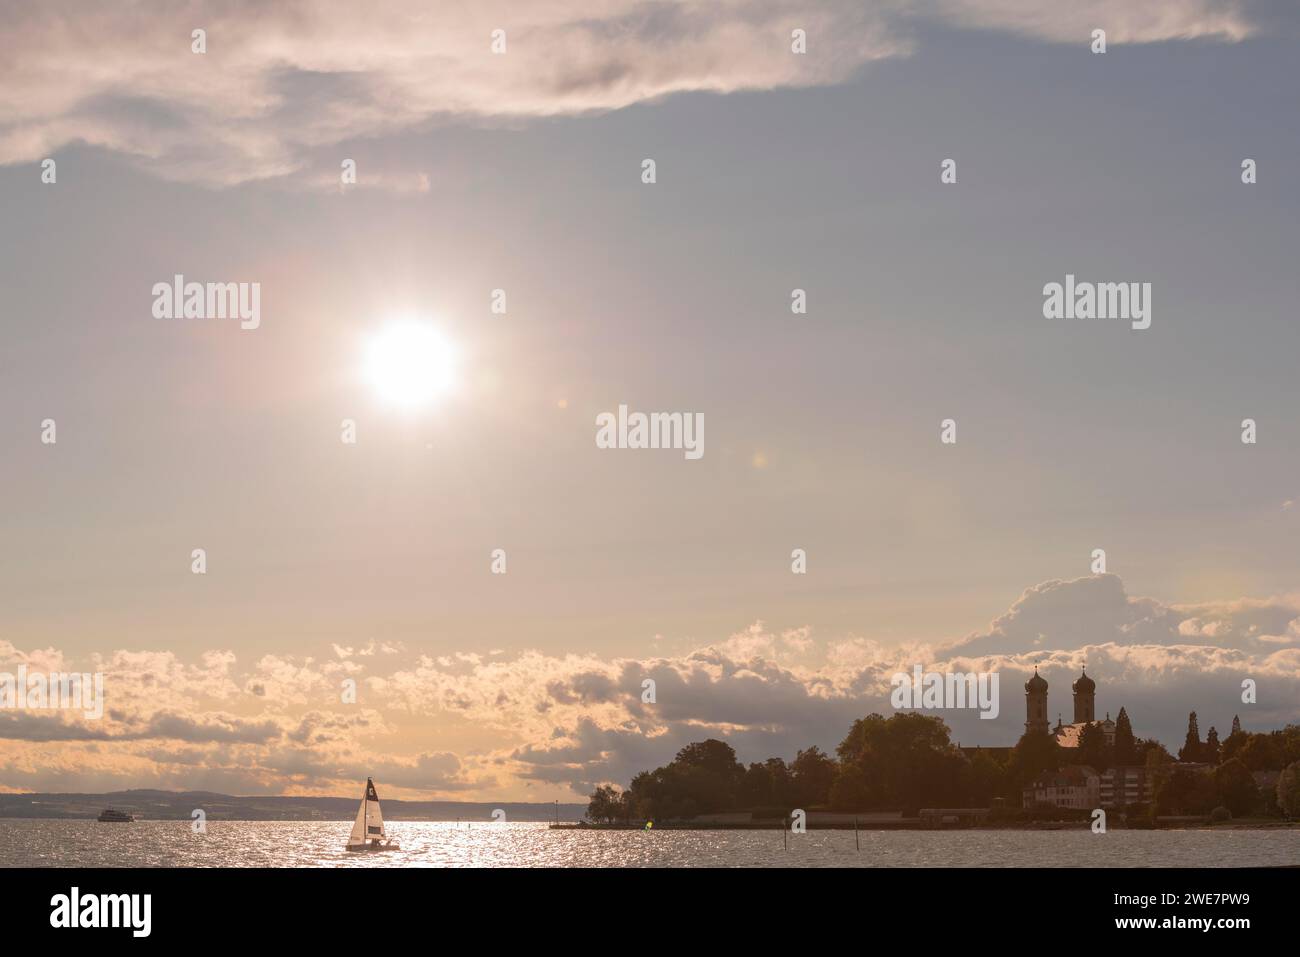 Baroque castle church, double tower, onion dome, evening light, sailing boat, Friedrichshafen on Lake Constance Baden-Wuerttemberg, Germany Stock Photo